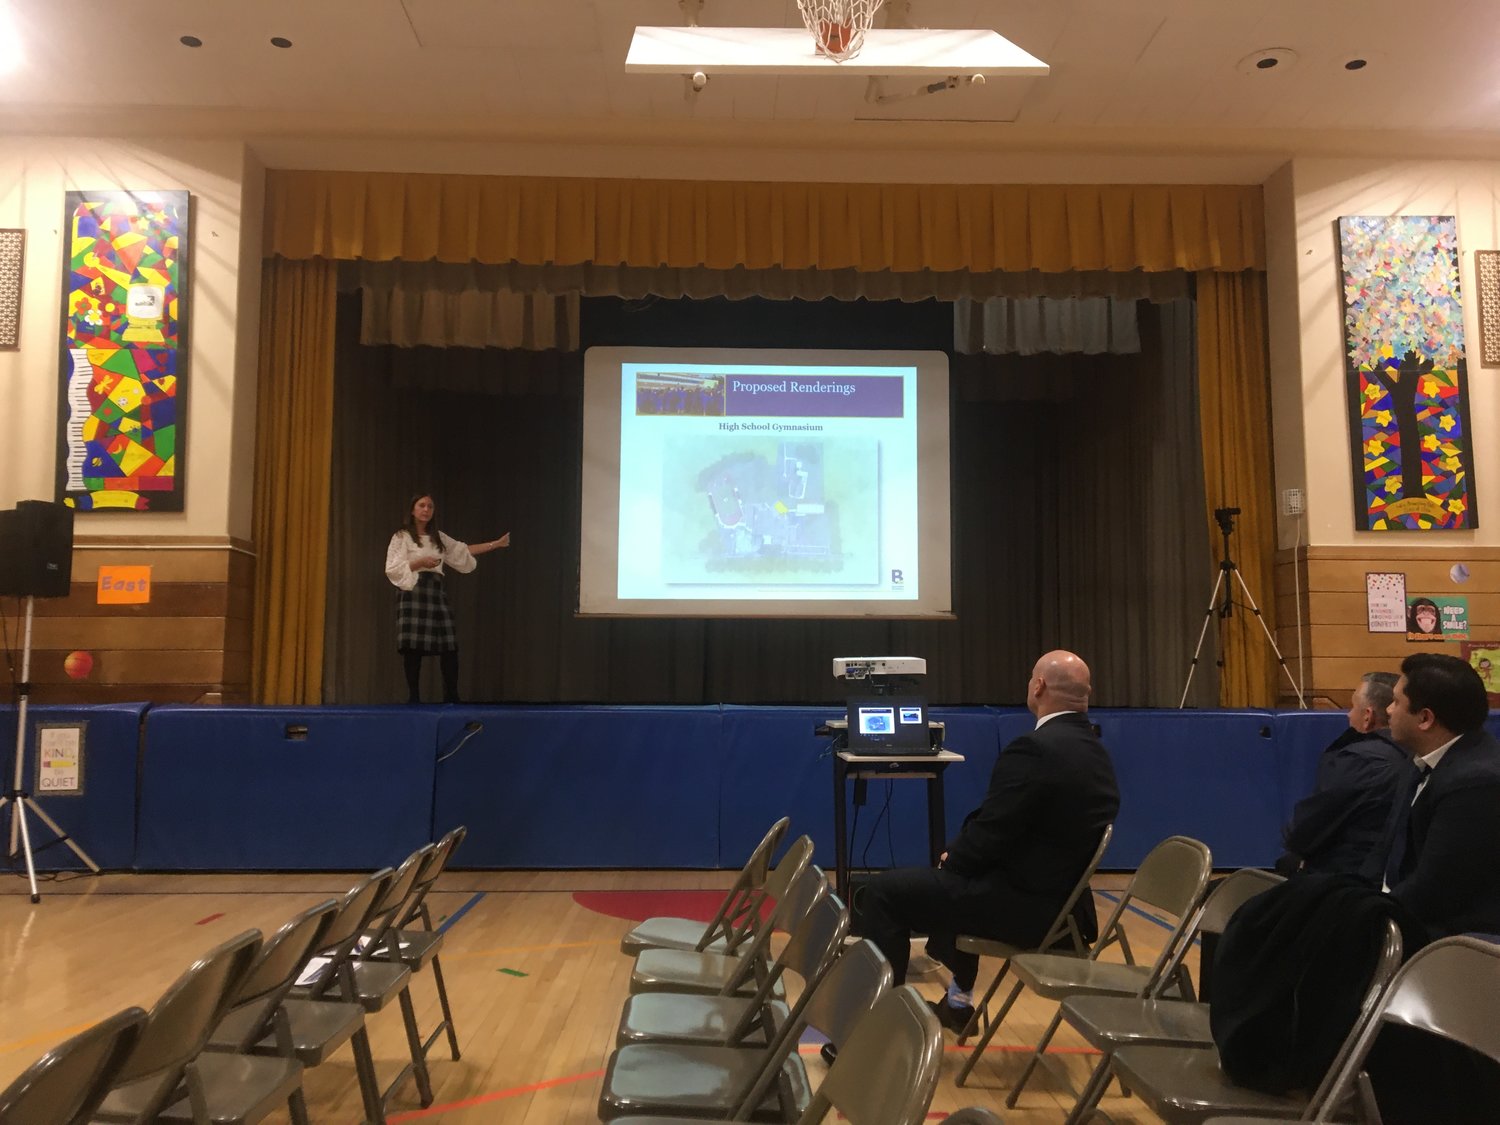 Schools Superintendent Dr. Shari Camhi presented the plans for Innovation 2020 at a Jan. 8 school board meeting at Plaza Elementary School.